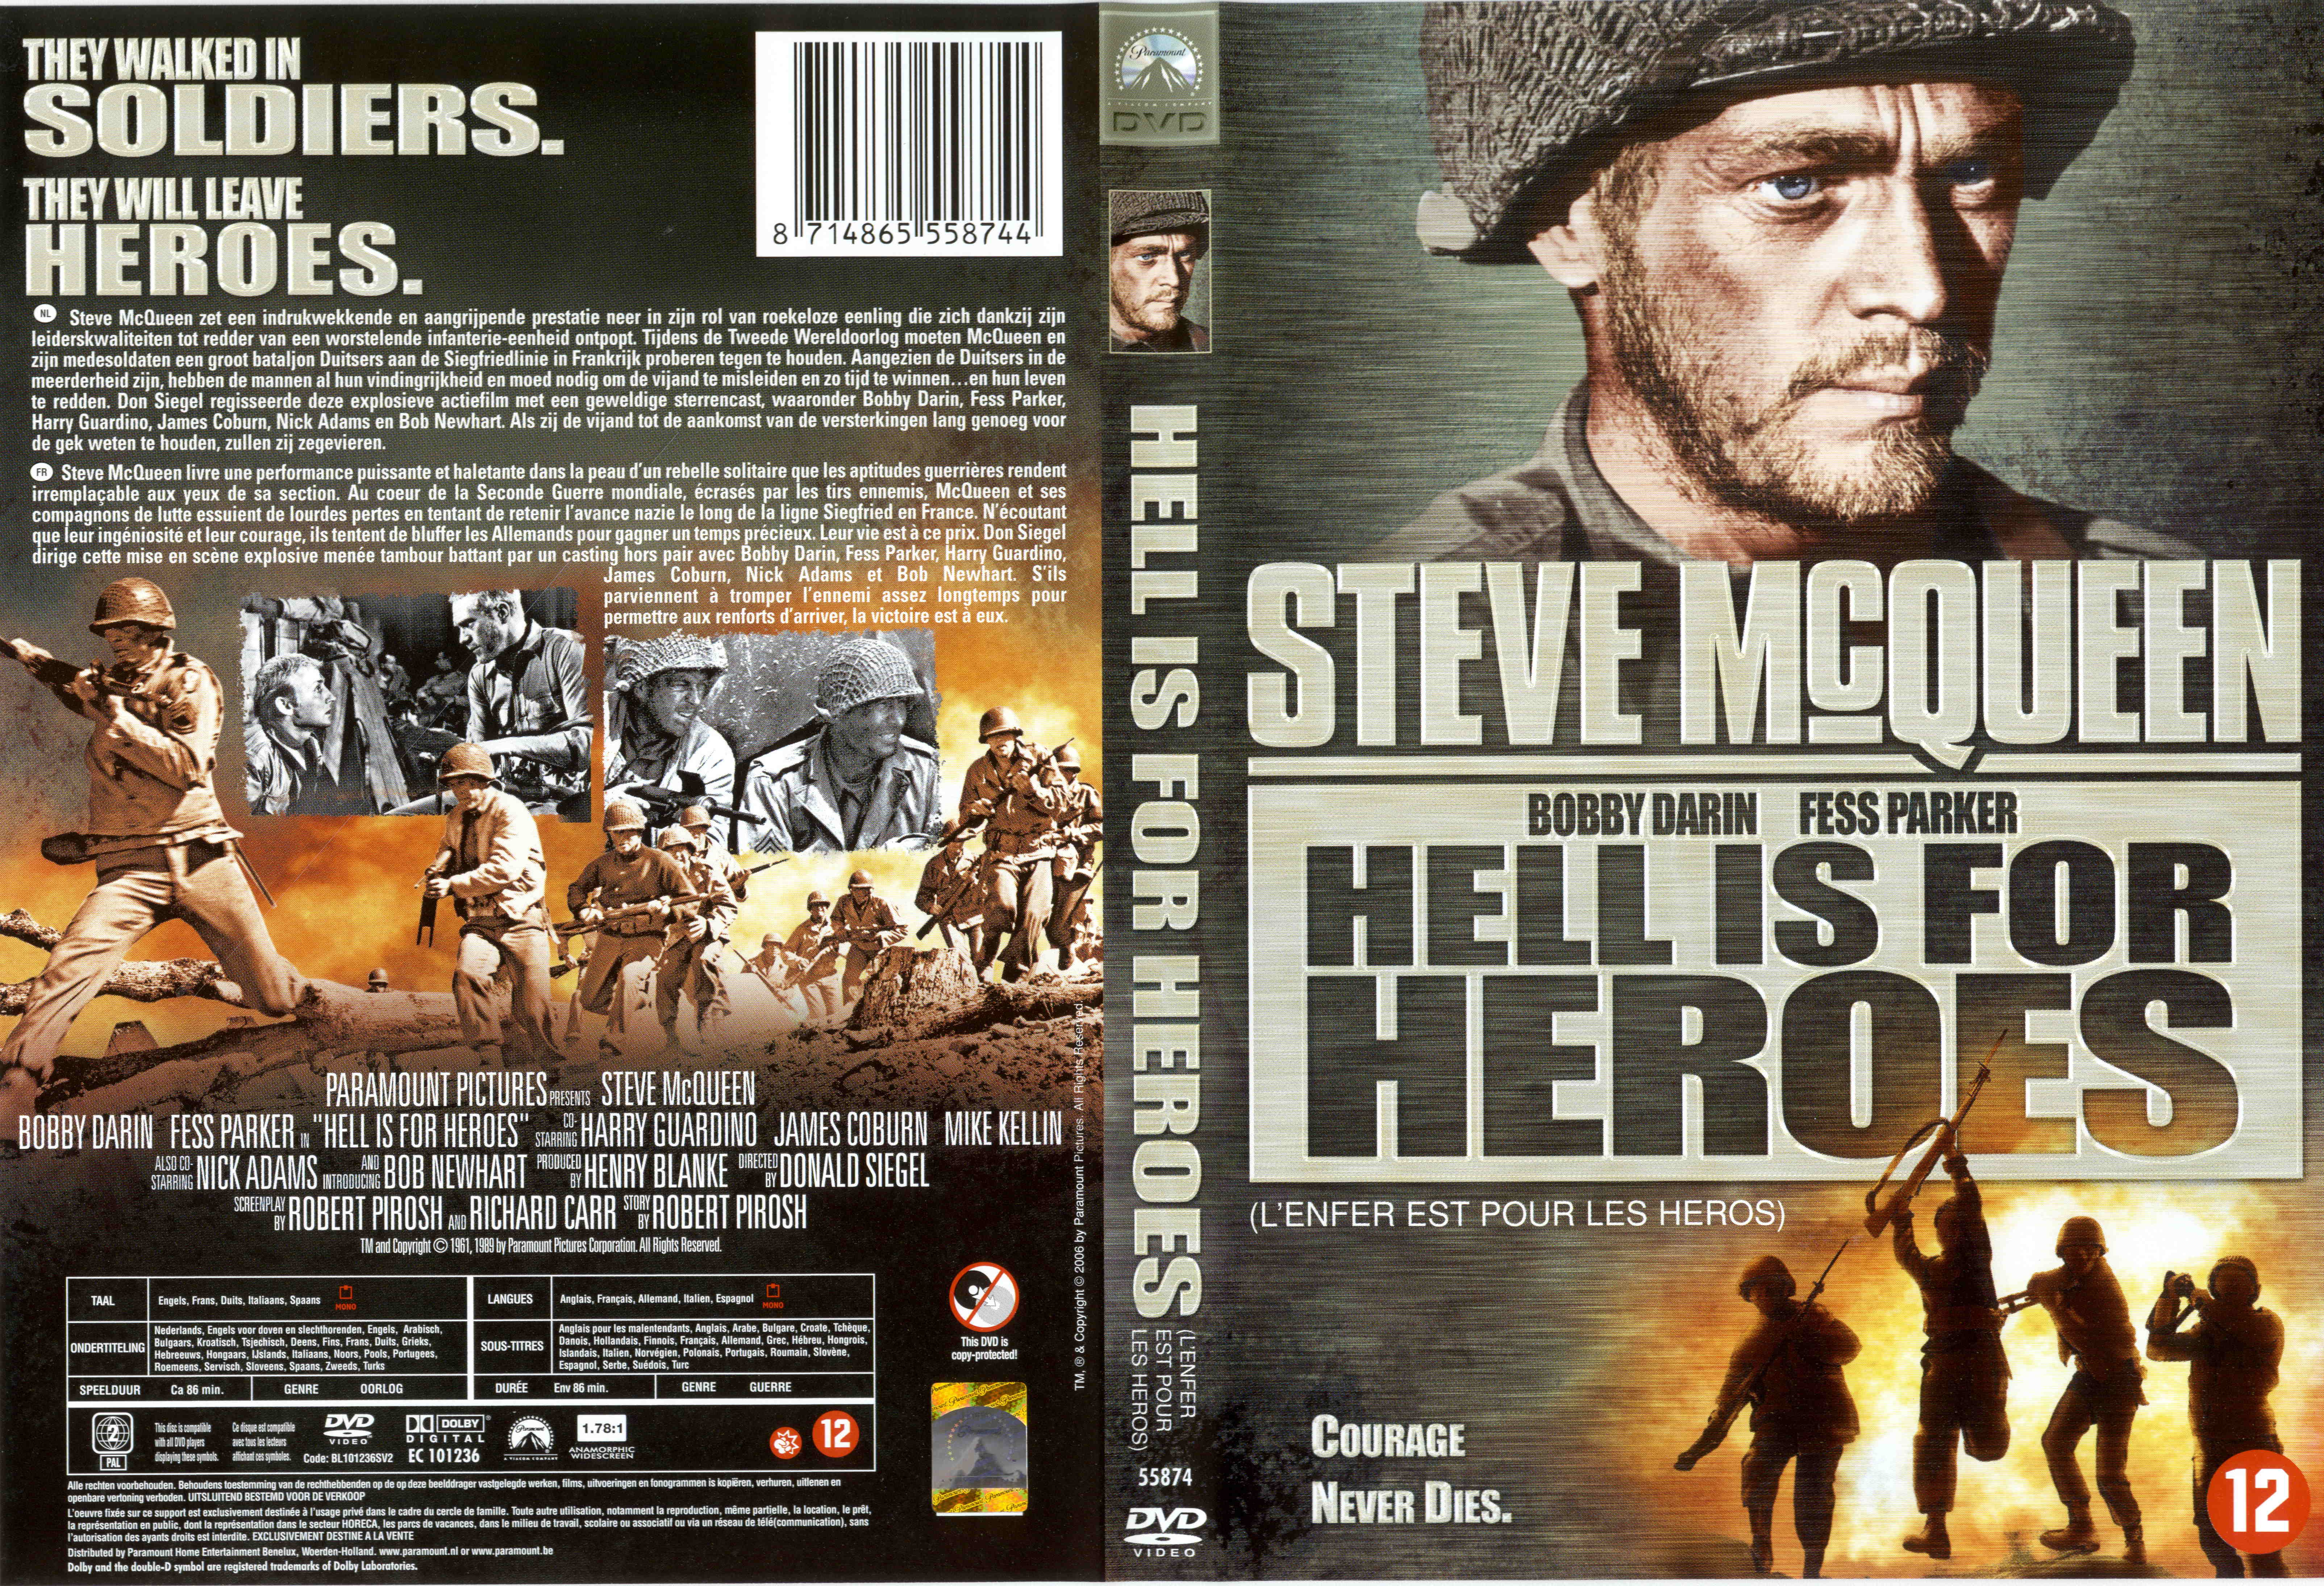 Jaquette DVD Hell is for heroes - L